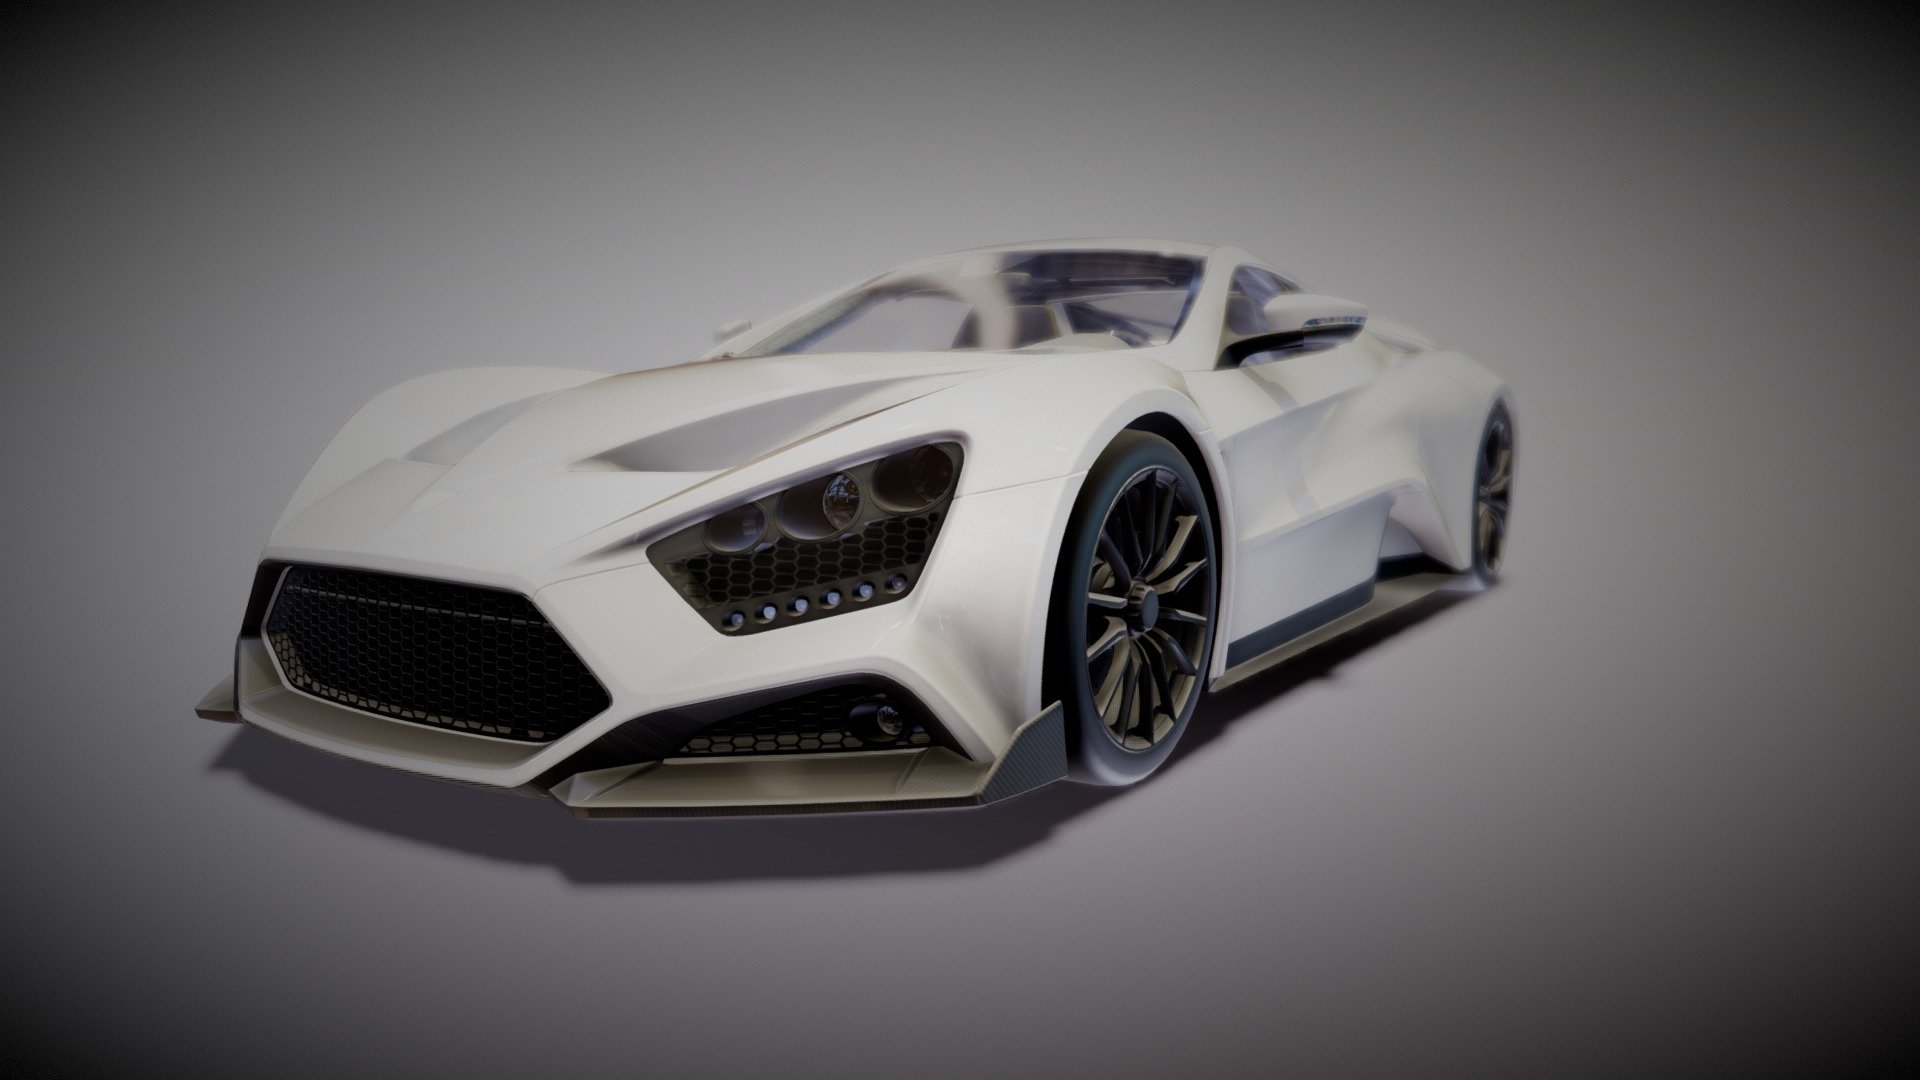 The Zenvo TS1 GT is a limited production sports car manufactured by Danish automobile manufacturer Zenvo Automotive. It was unveiled at the 2016 Geneva Motor Show. Though the TS1 GT shares a similar chassis and body with its predecessor, the ST1, its new powertrain and upgraded interior earn it a new model designation along with the &lsquo;grand tourer' qualification 3d model